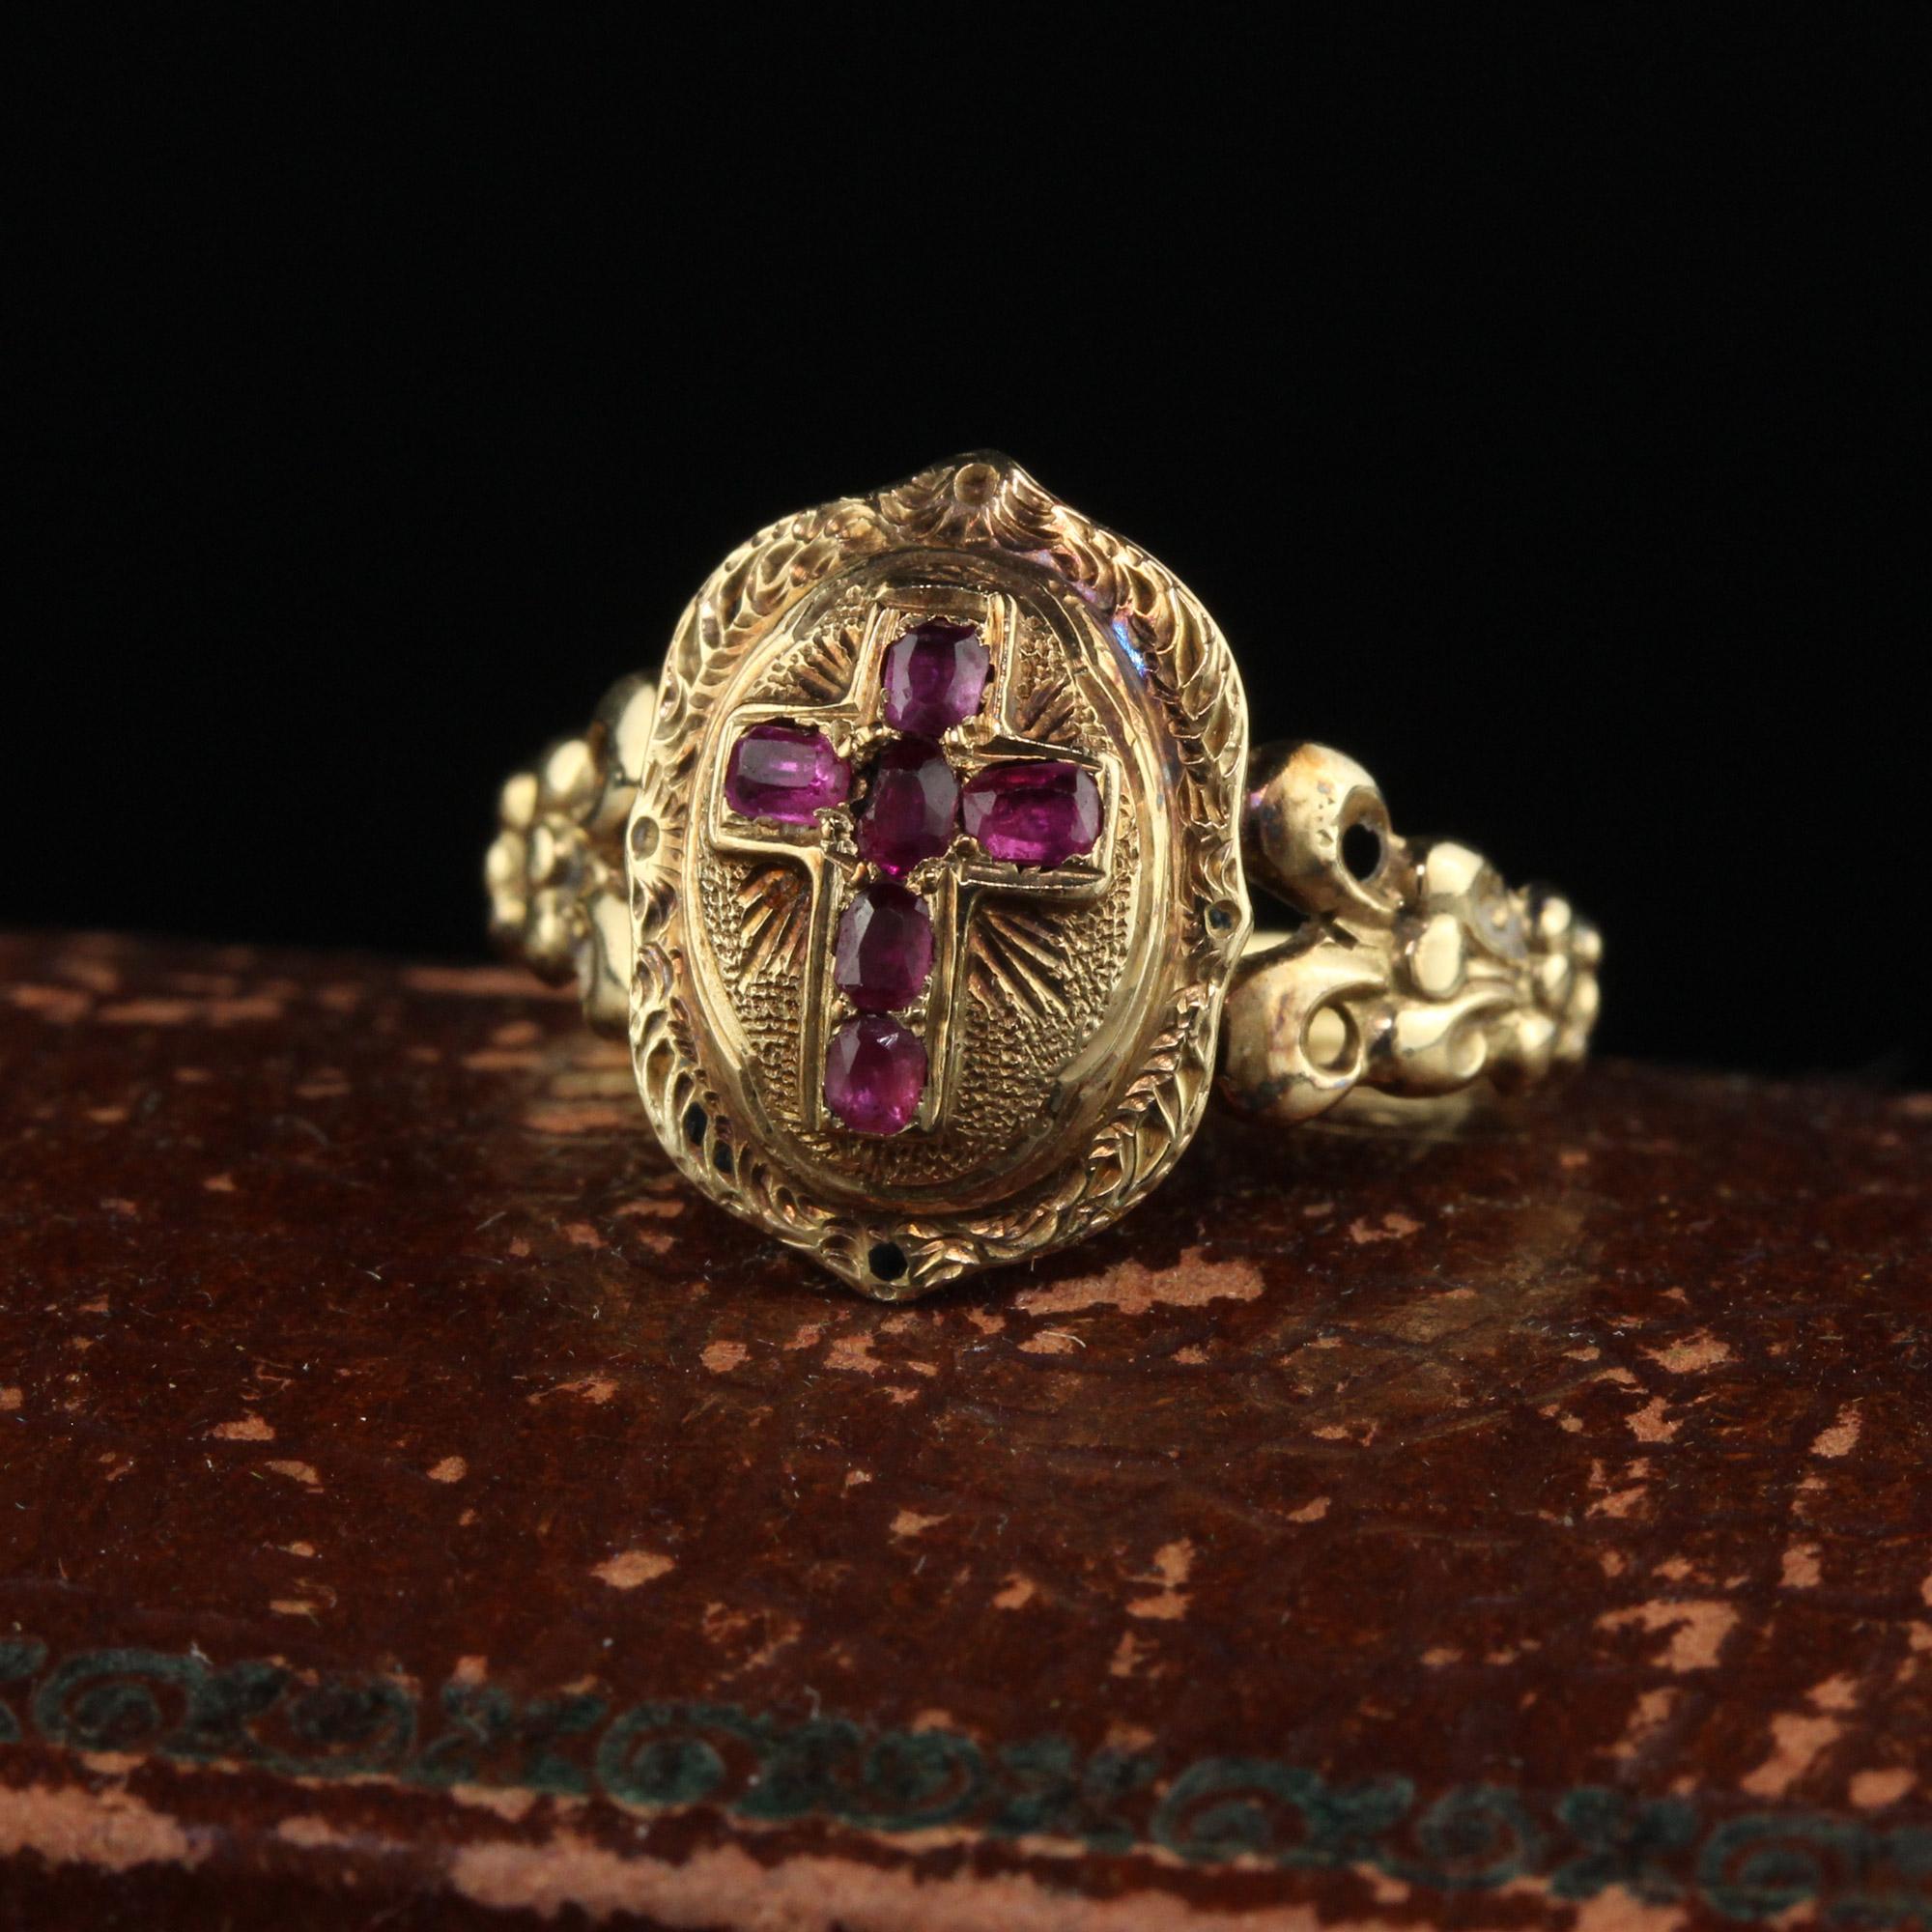 Beautiful Antique Victorian 18K Yellow Gold Burmese Ruby Cross Ring - Size 4 3/4. This beautiful ring is crafted in 18k yellow gold. The center has a cross that has natural Burmese rubies on it. The ring sits low on the finger and is beautifully